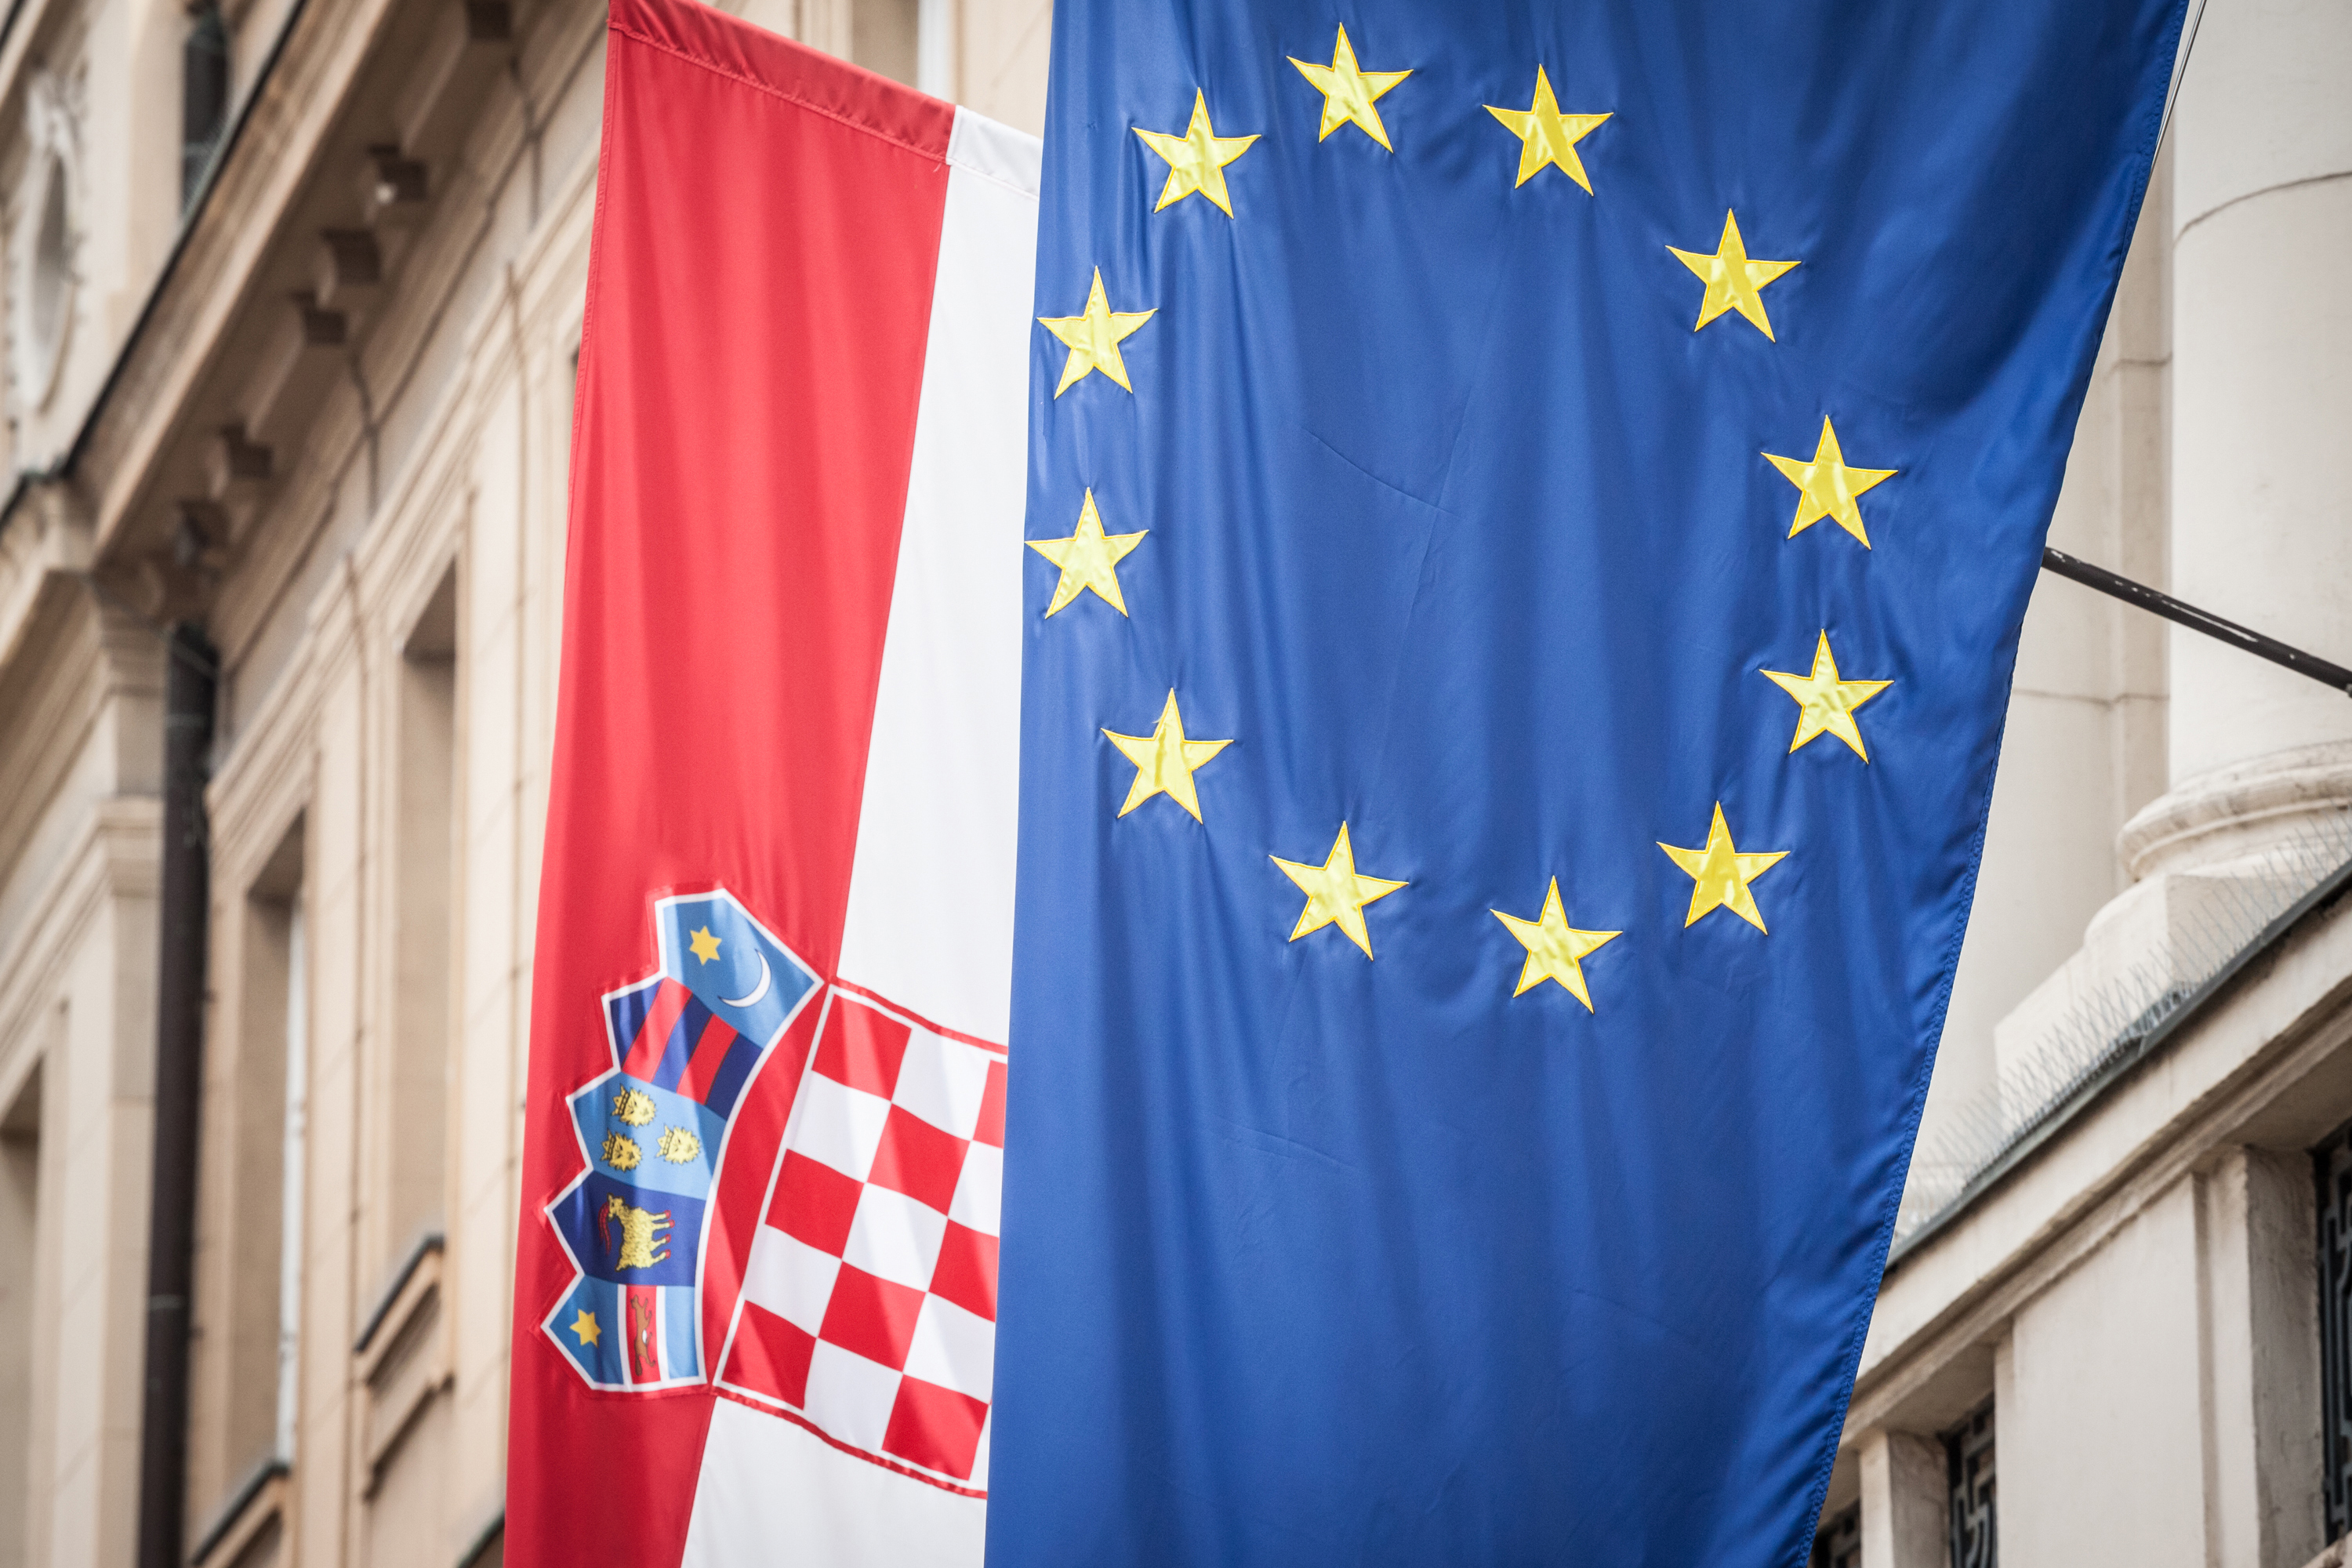 Croatian residence permit does not need to be issued to EU passport holders